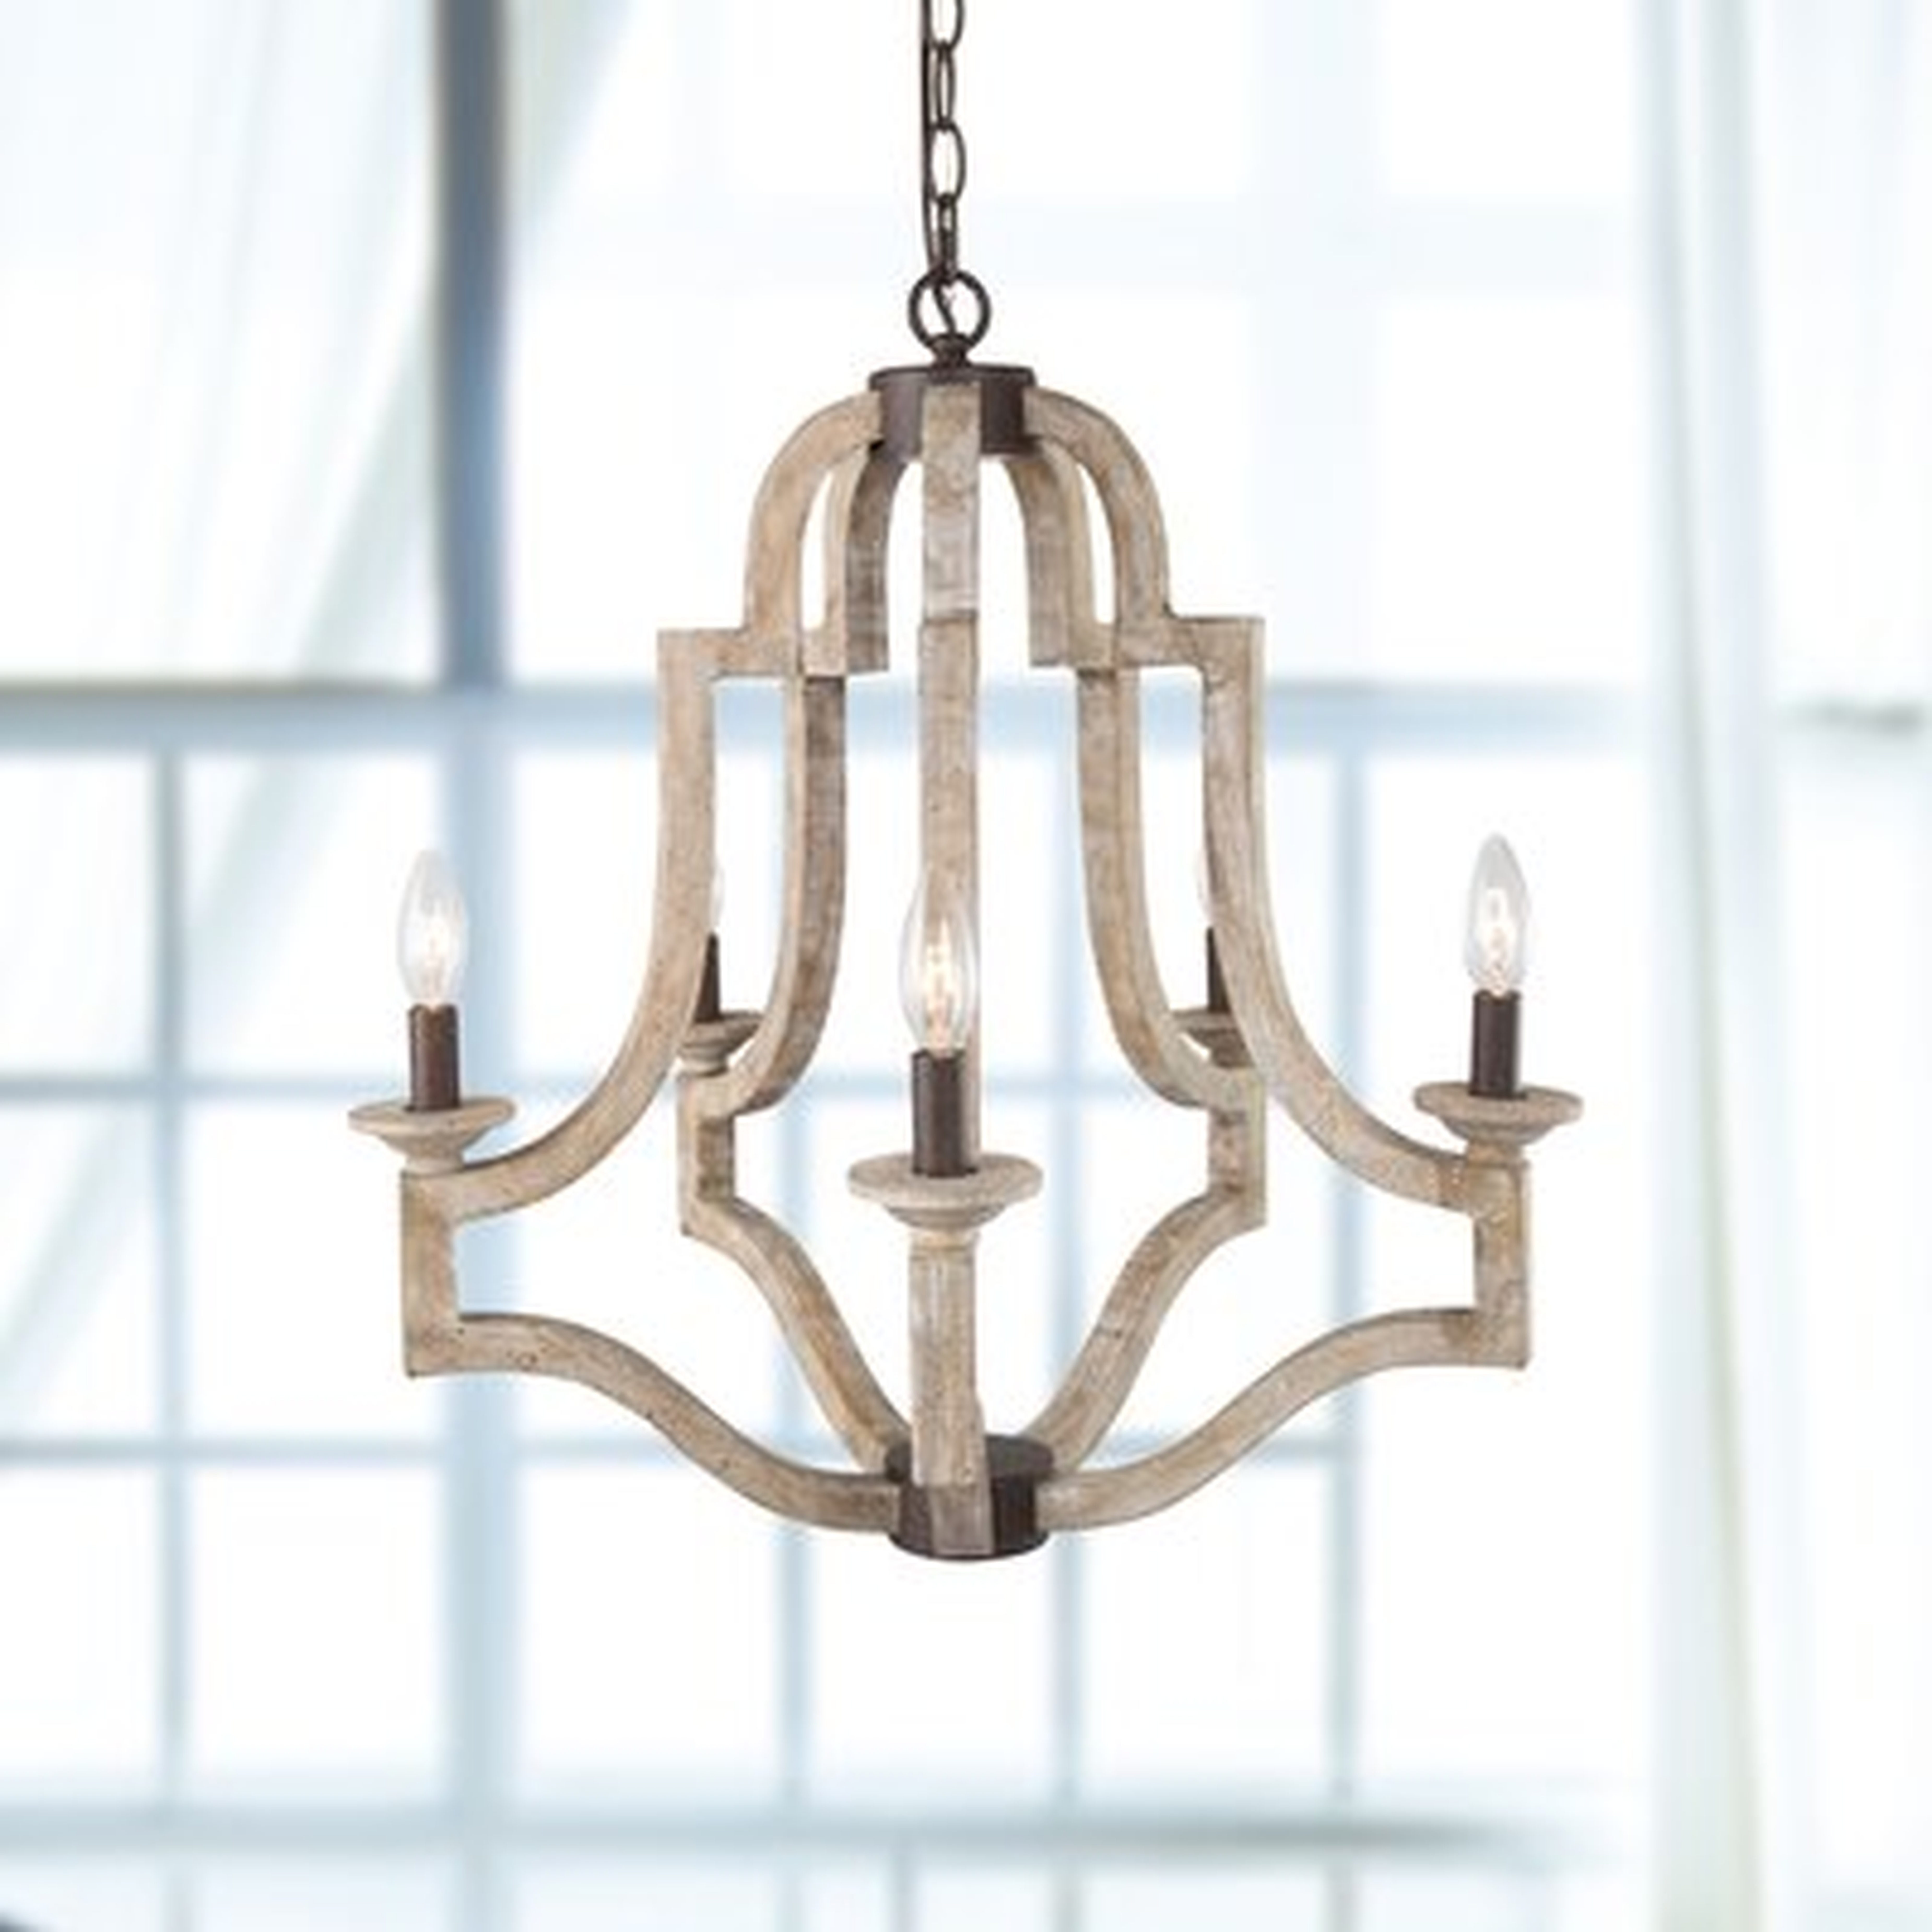 Haygood 5 - Light Candle Style Empire Chandelier - Wayfair